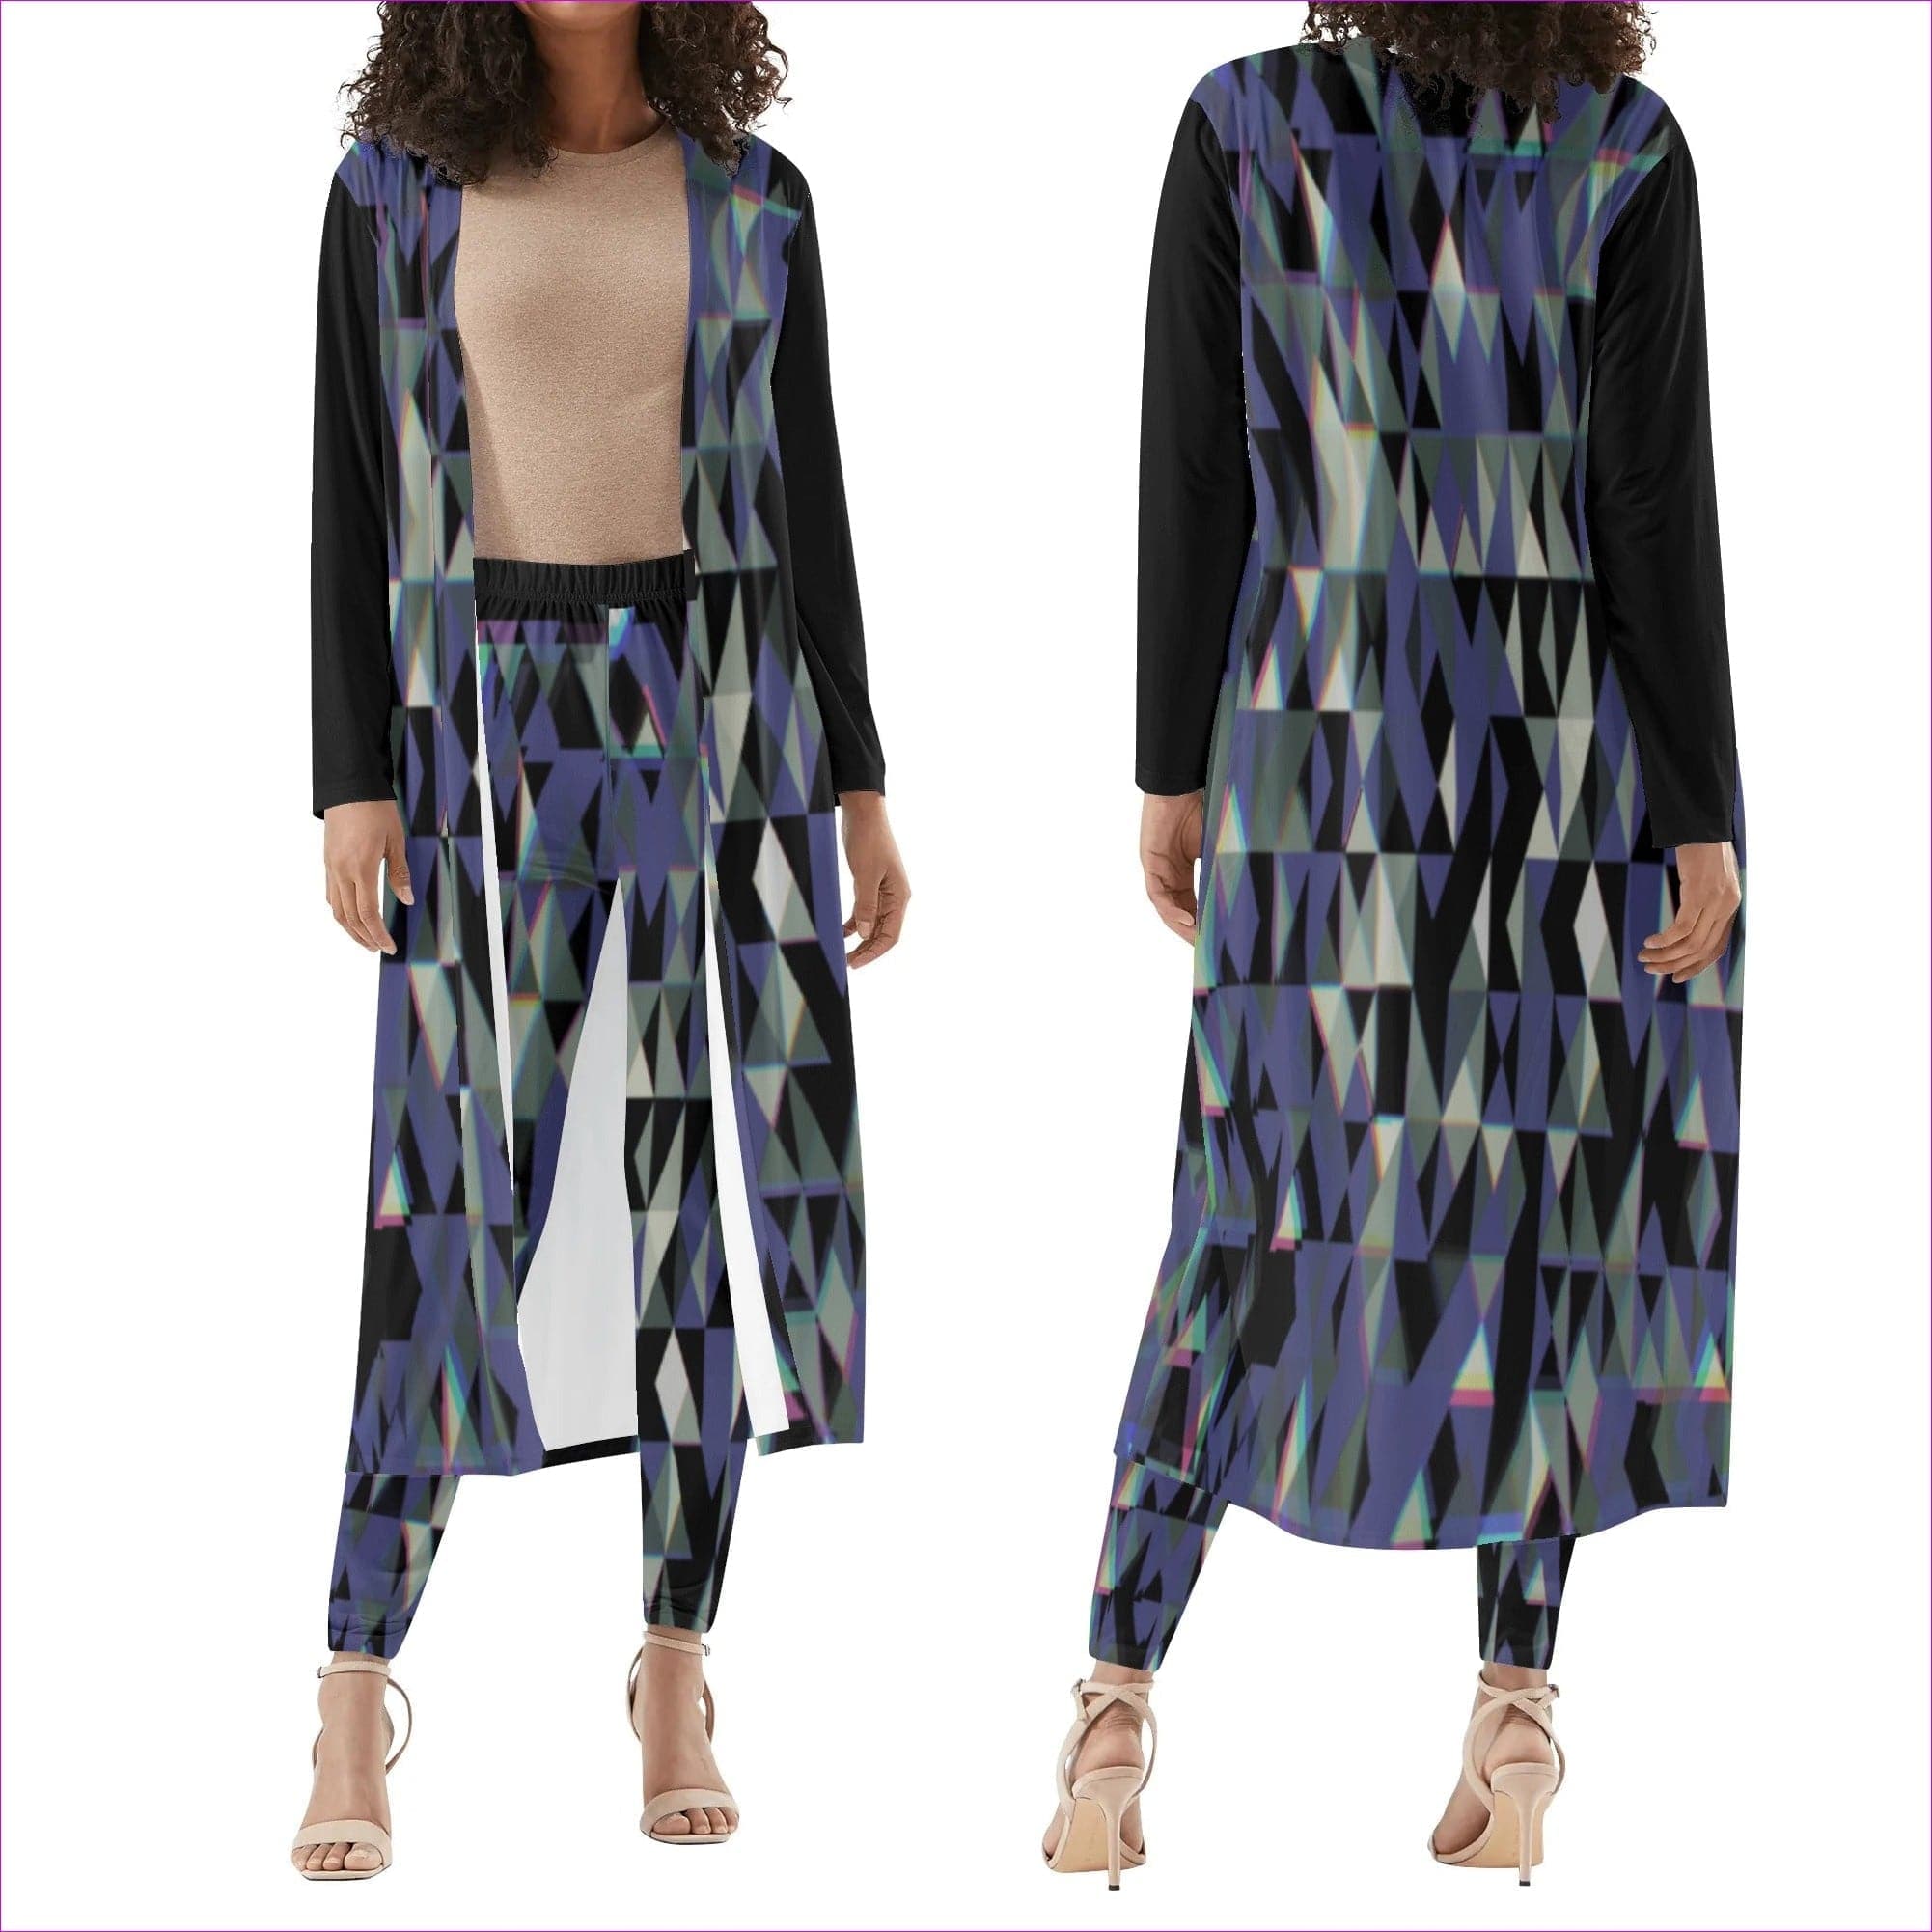 Blue/Black S - Fractured Womens Long Sleeve Cardigan and Leggings 2pcs - womens top & leggings set at TFC&H Co.